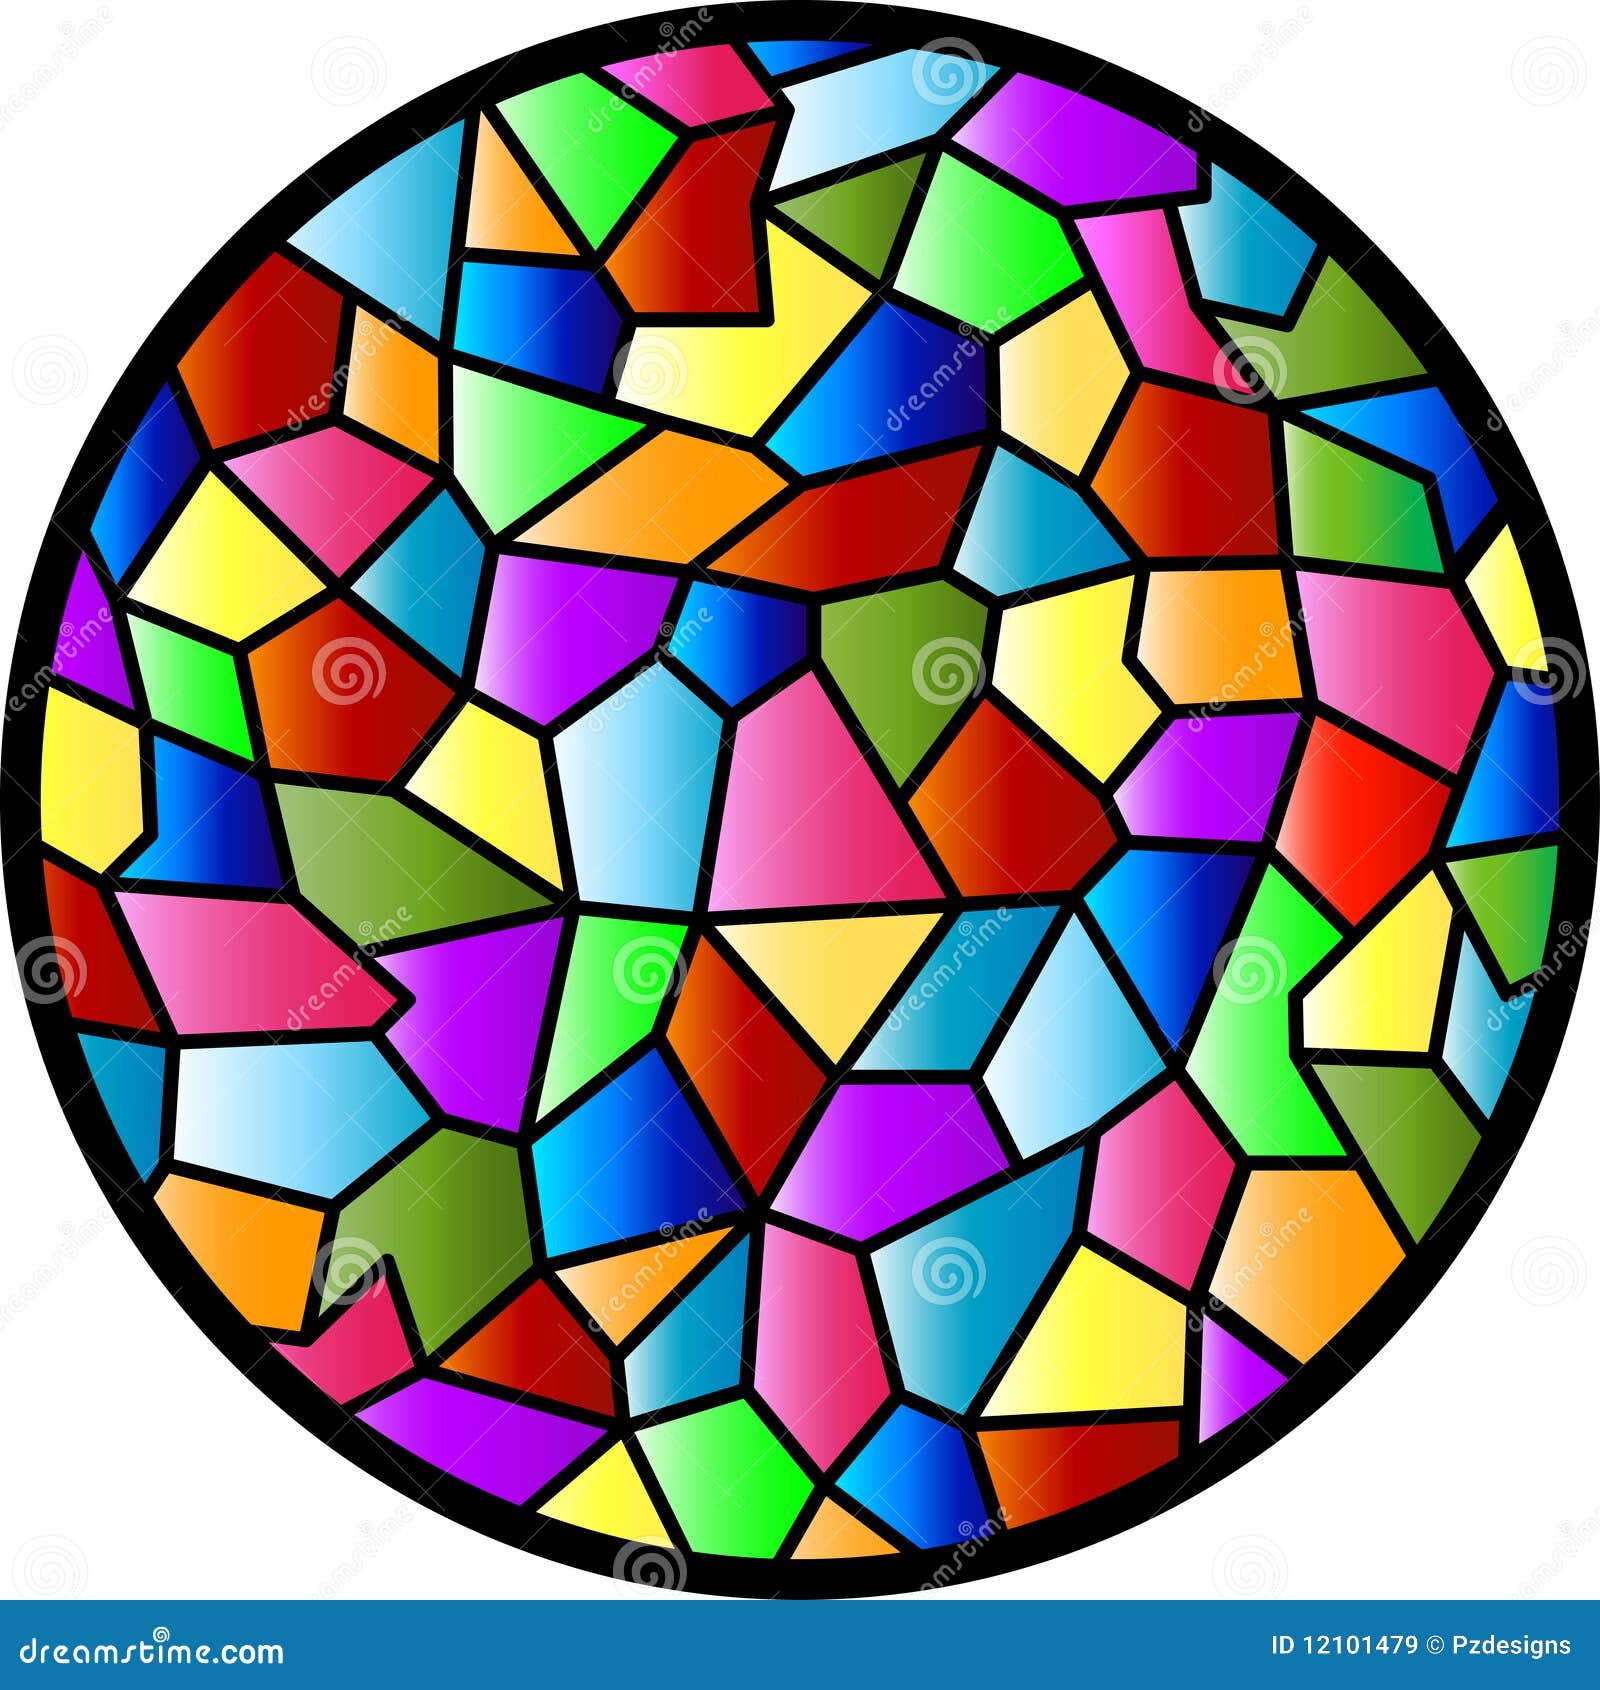 free stained glass clipart - photo #49